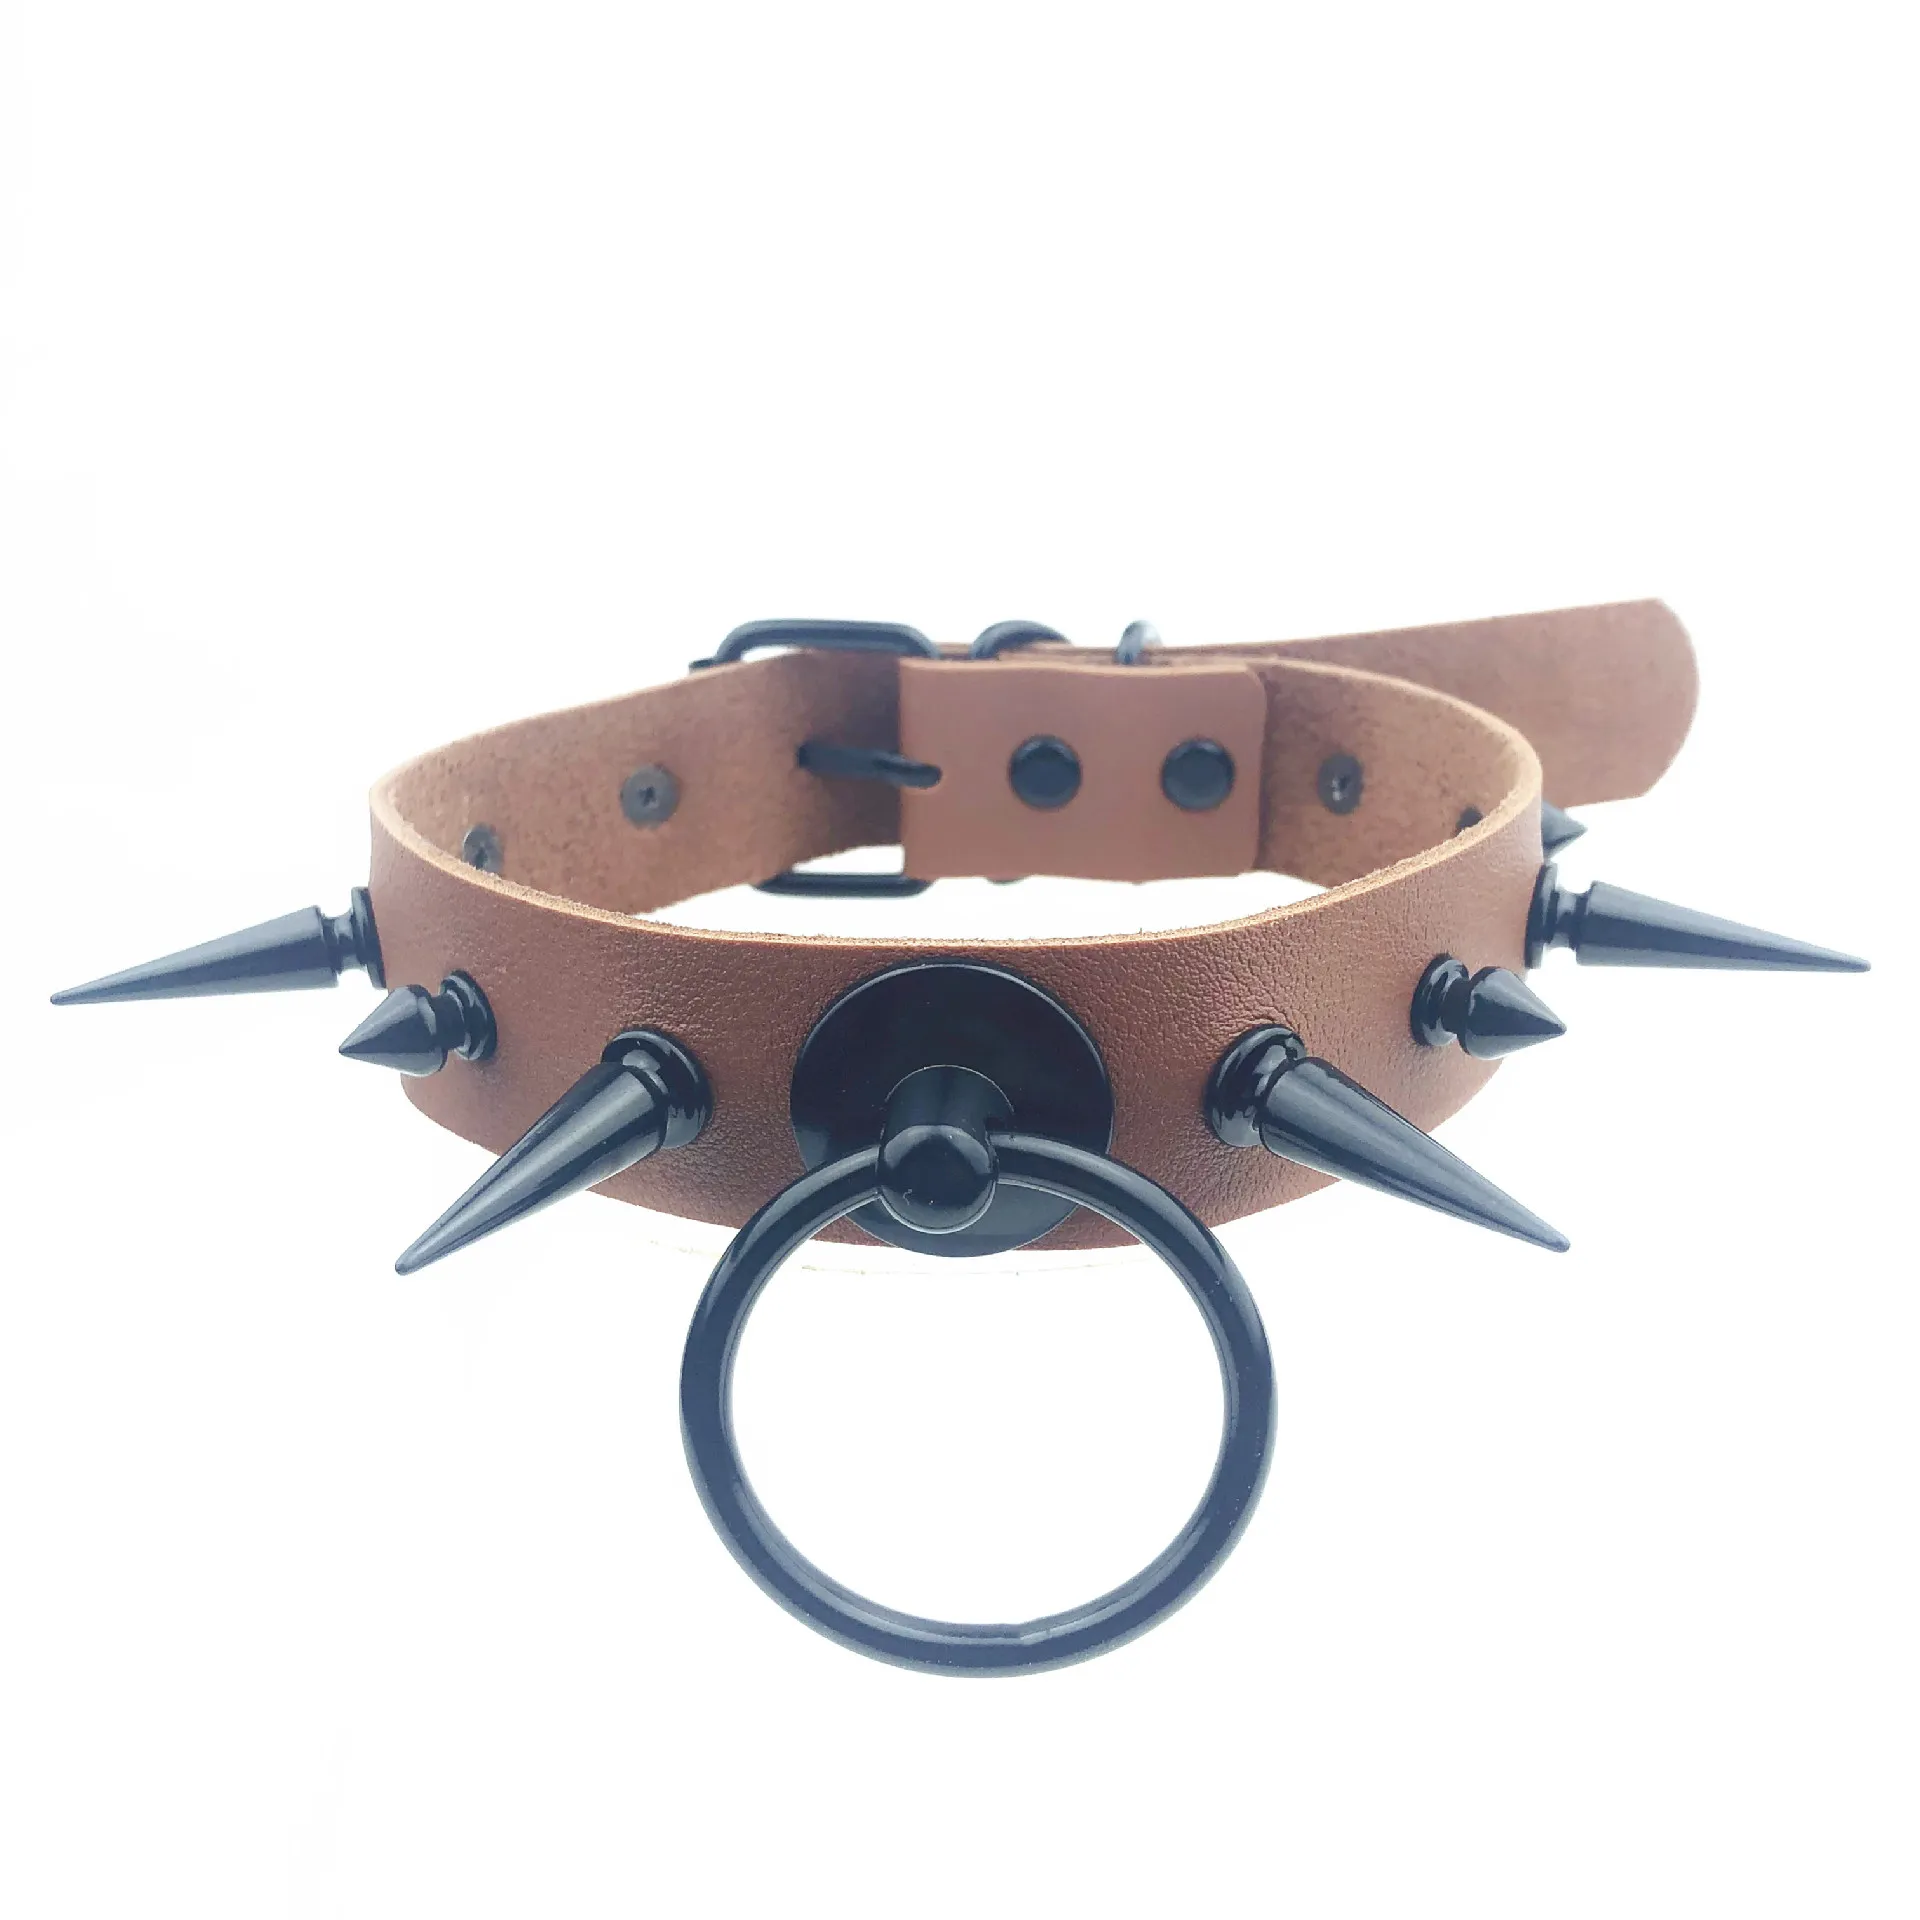 Chokers Gothic Black Spiked Punk Choker Collar Spikes Rivets Studded Chocker Necklace For Women Men Bondage Cosplay Goth Je Dhgarden Dhrxn